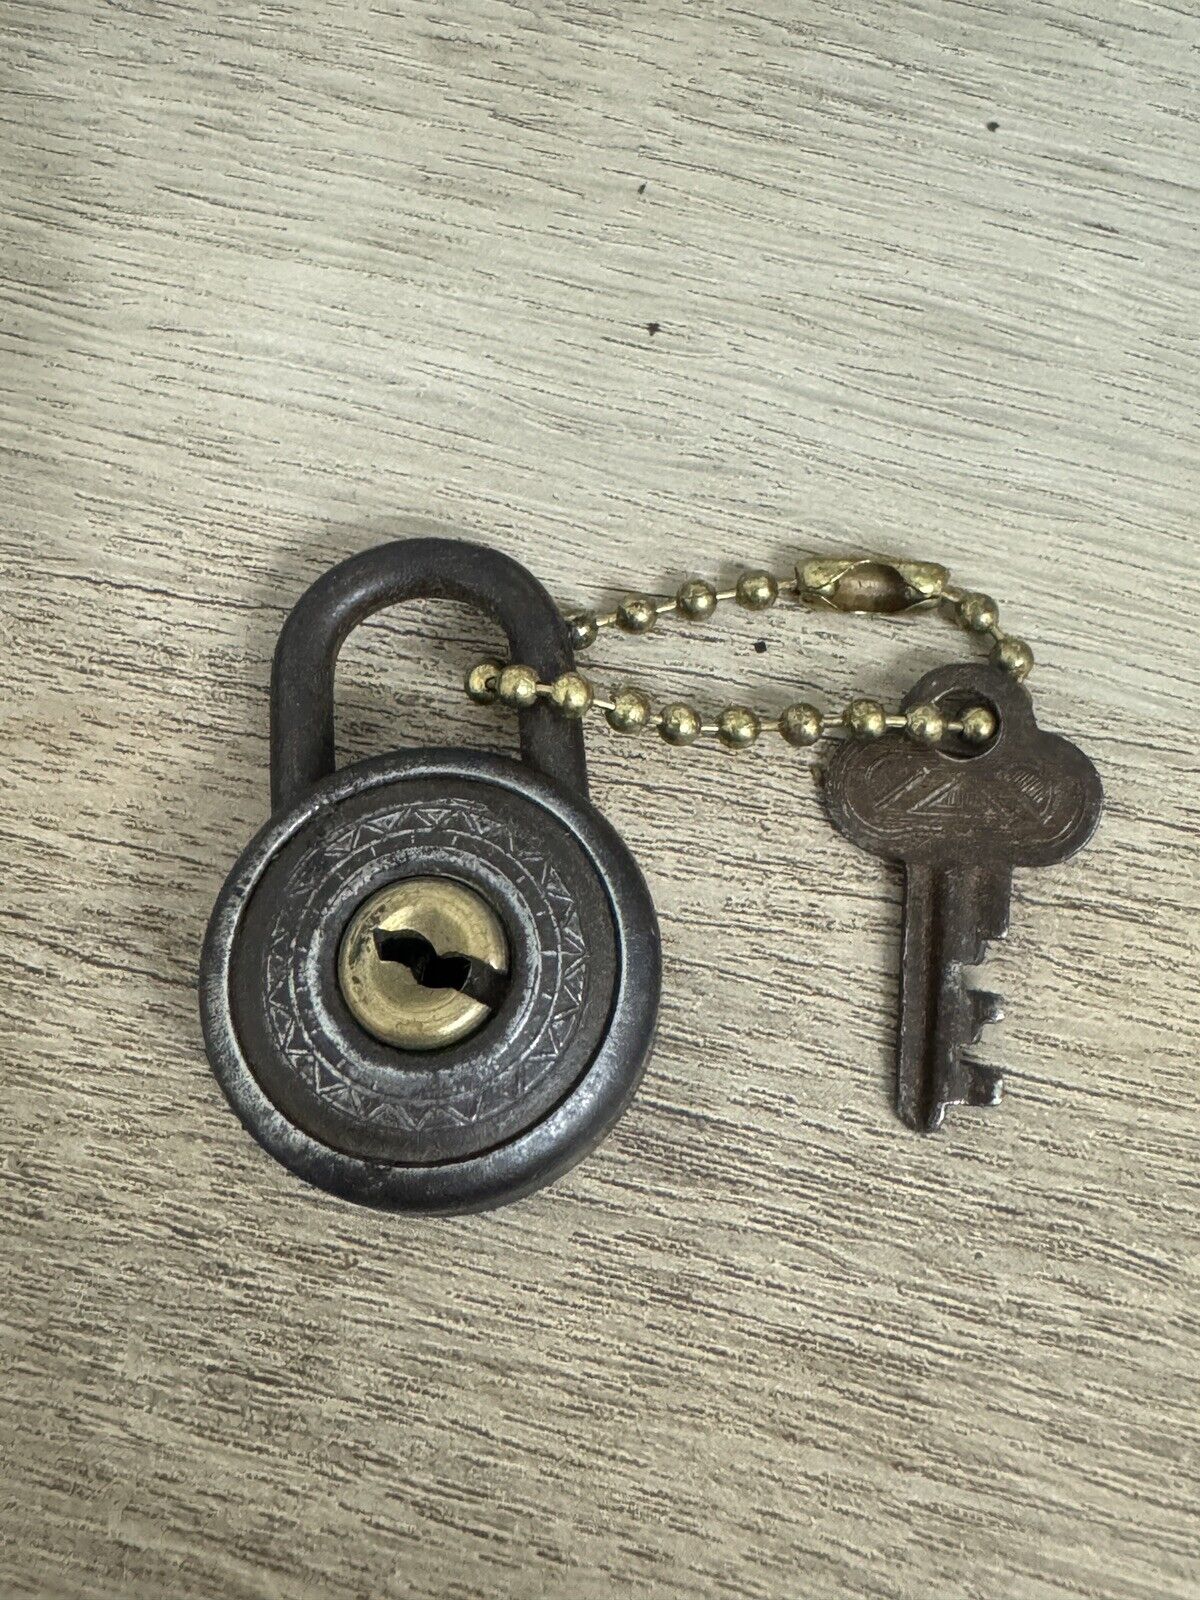 Vintage Old Small 444 Abus Padlock With Key Lock Germany